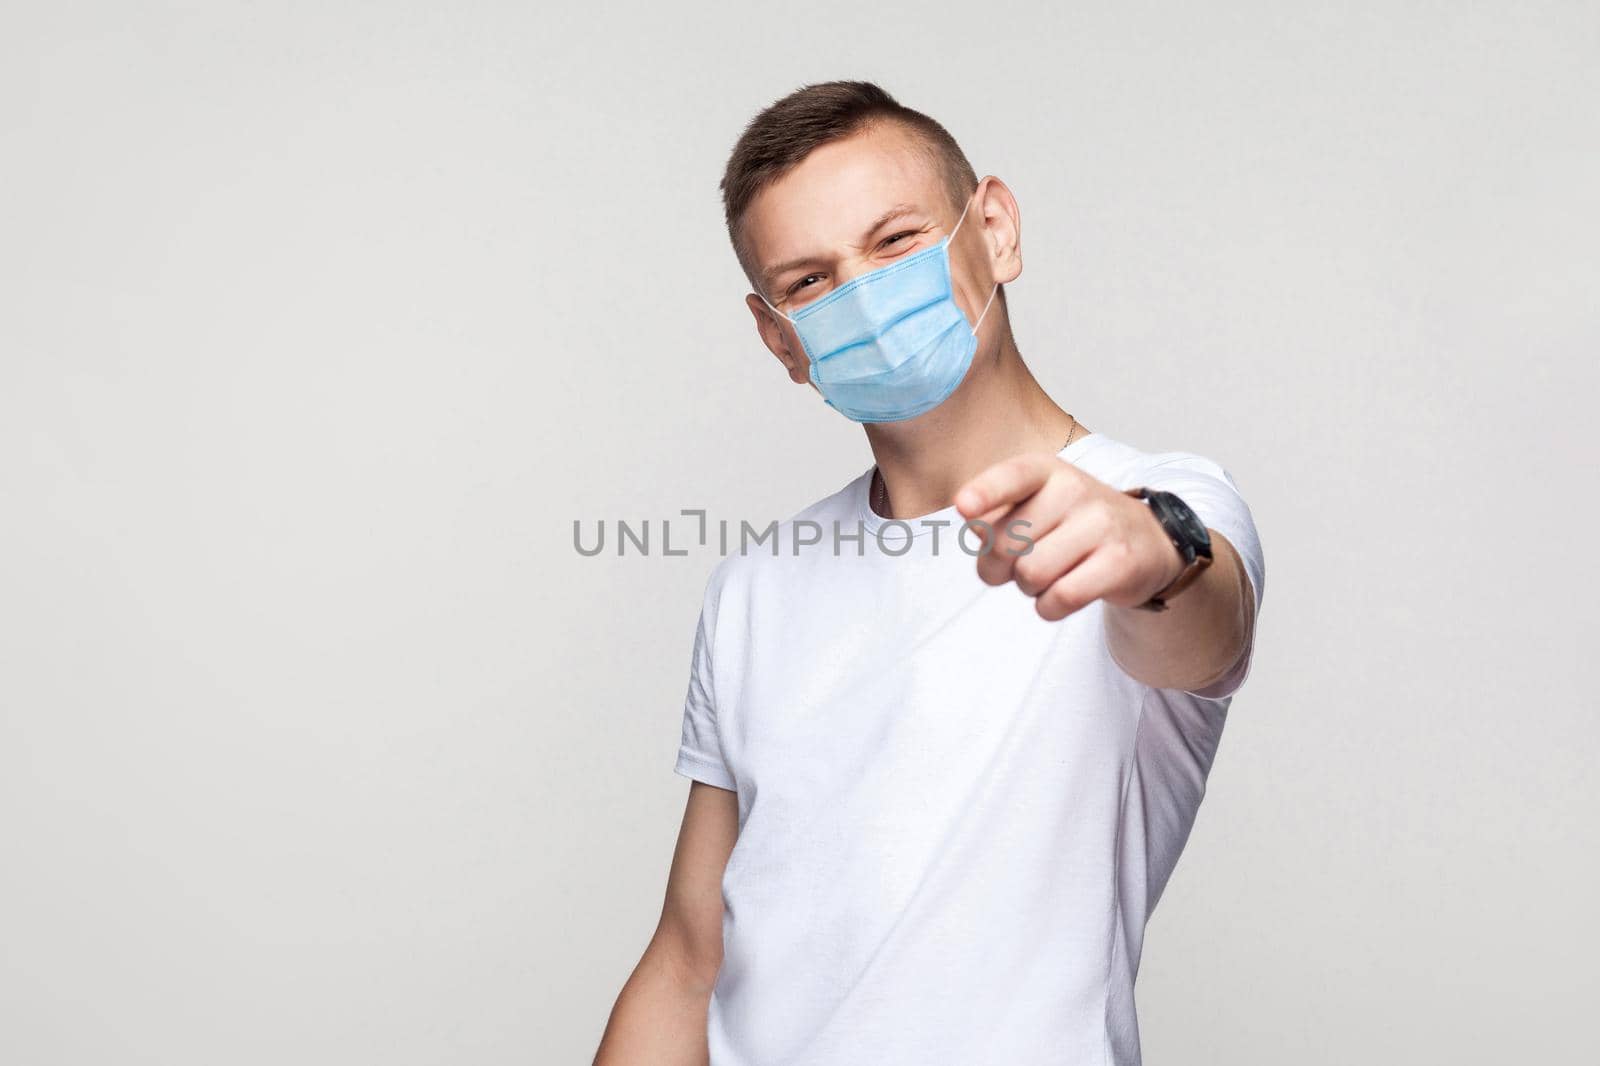 You are so funny. Portrait of young man in white shirt with surgical medical mask standing, looking and pointing at camera with smiley face. indoor studio shot, isolated on gray background.